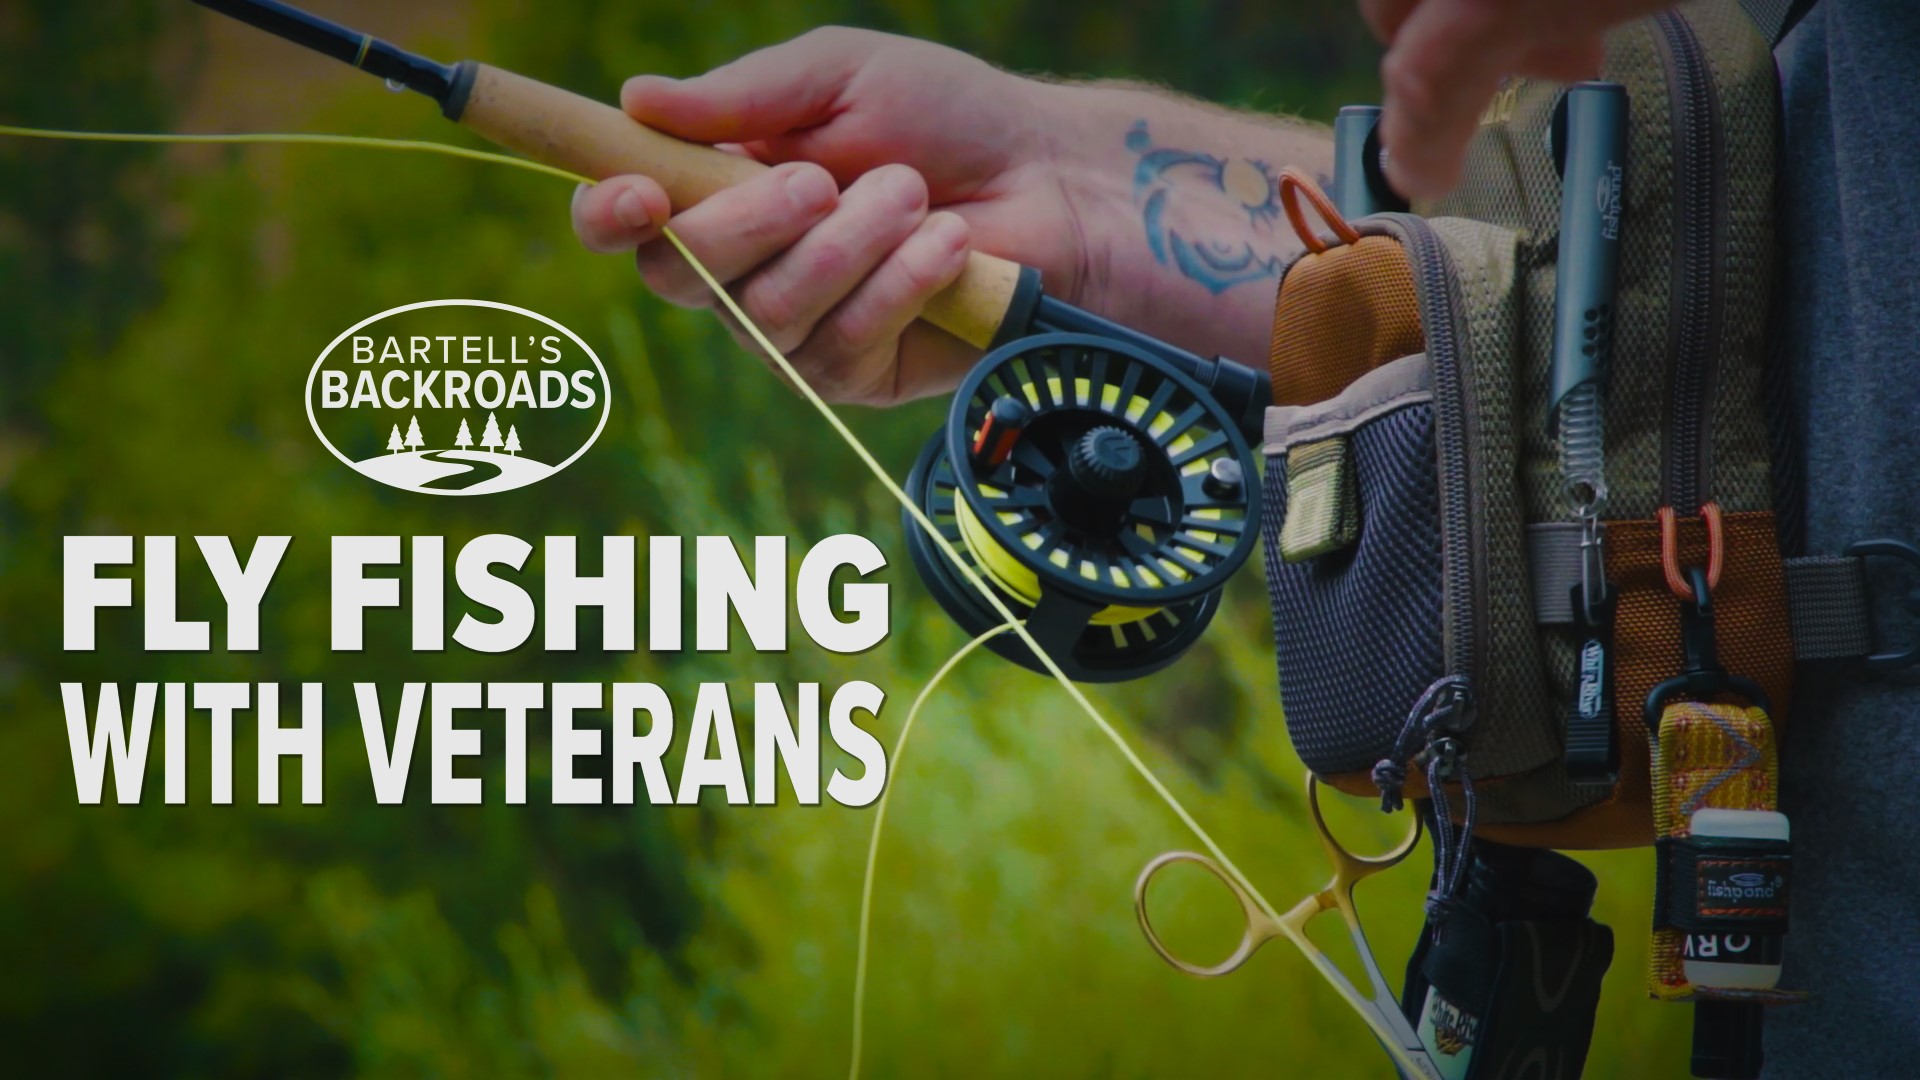 Veterans gather at a fly fishing camp to speak to one another about what's on their minds.